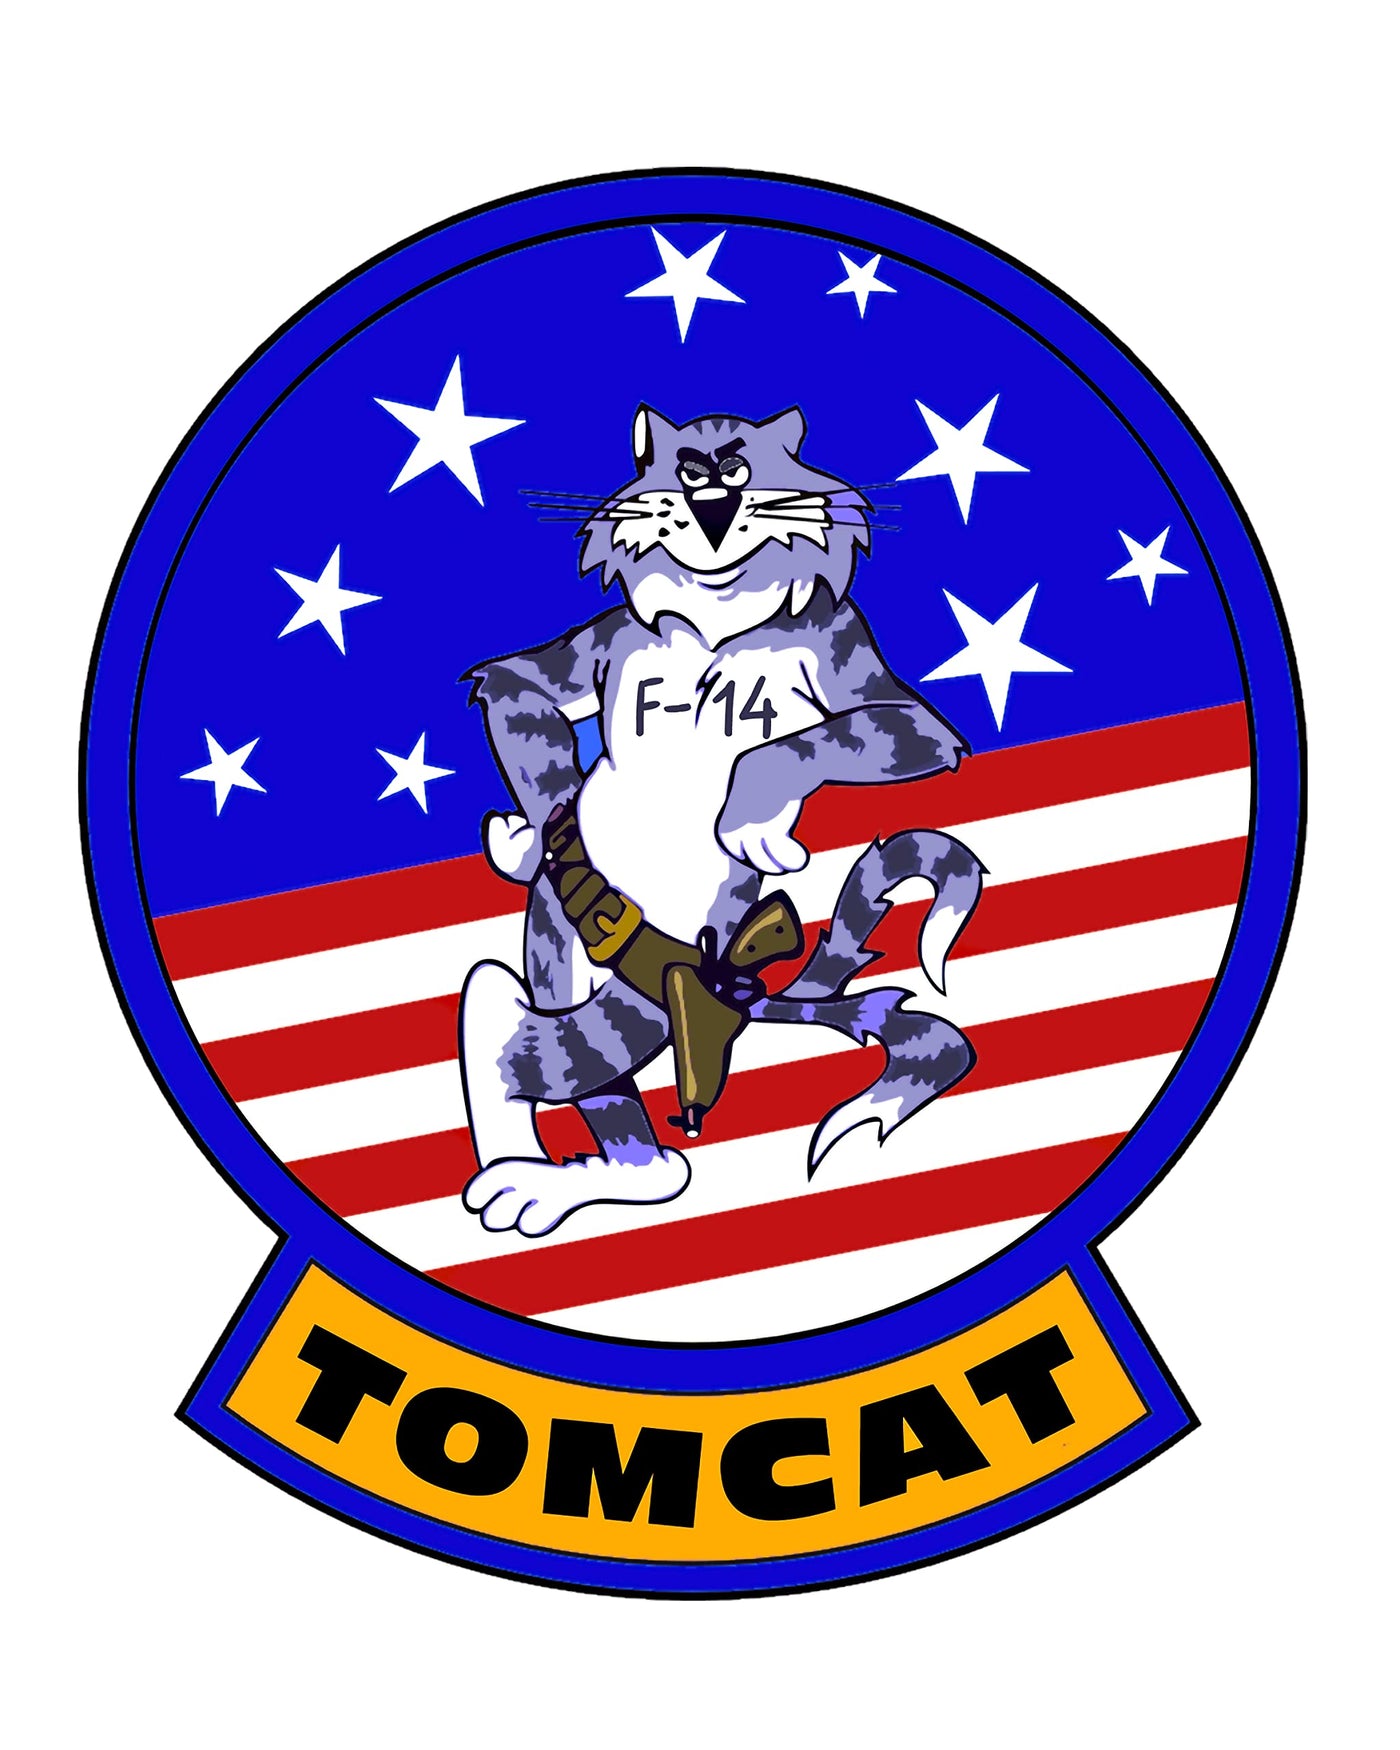 US Air Force Grumman F14 Tomcat Fighter Jet Logo -8 x 10" American Military Aircraft Print -Ready to Frame. Home-Office-Game Room-Man Cave Decor. Great Gift for Active Duty Military & Veterans!